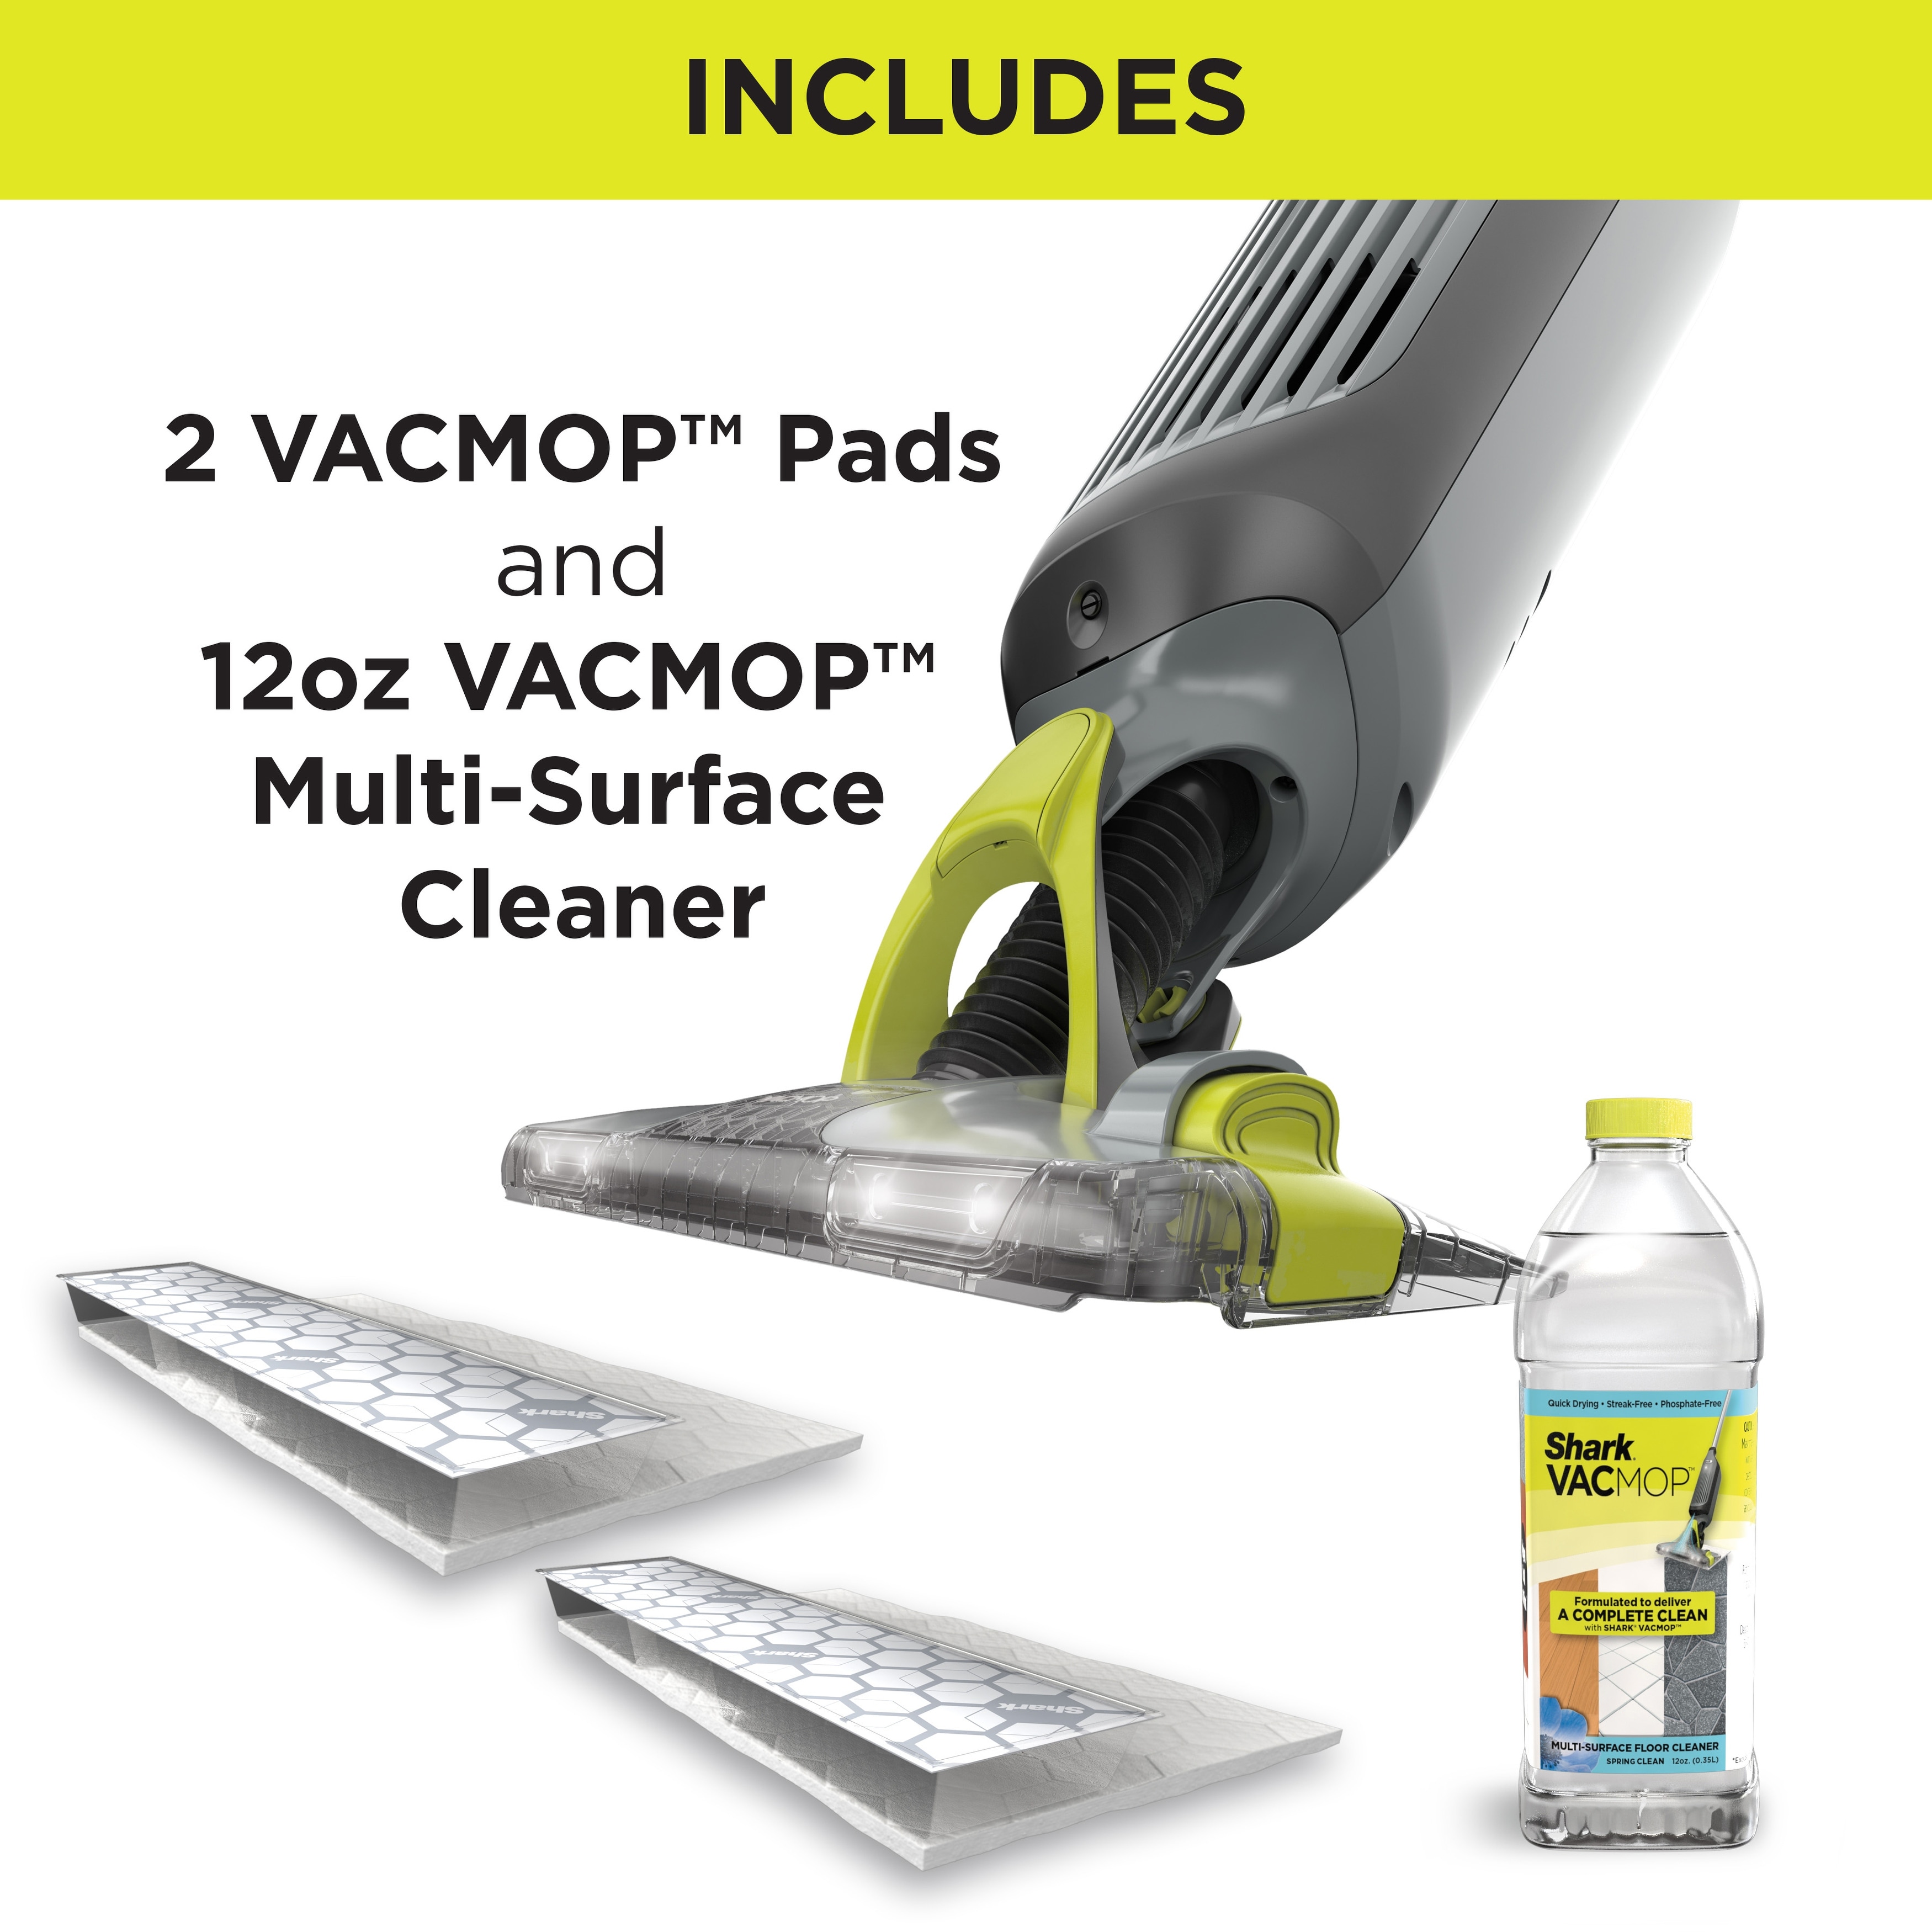 https://ak1.ostkcdn.com/images/products/is/images/direct/b090e10e6c3d6d3da97b4ab6a3554efbb9d2633f/Shark-VACMOP-Pro-Cordless-Hard-Floor-Vacuum-Mop-with-Disposable-VACMOP-Pad.jpg